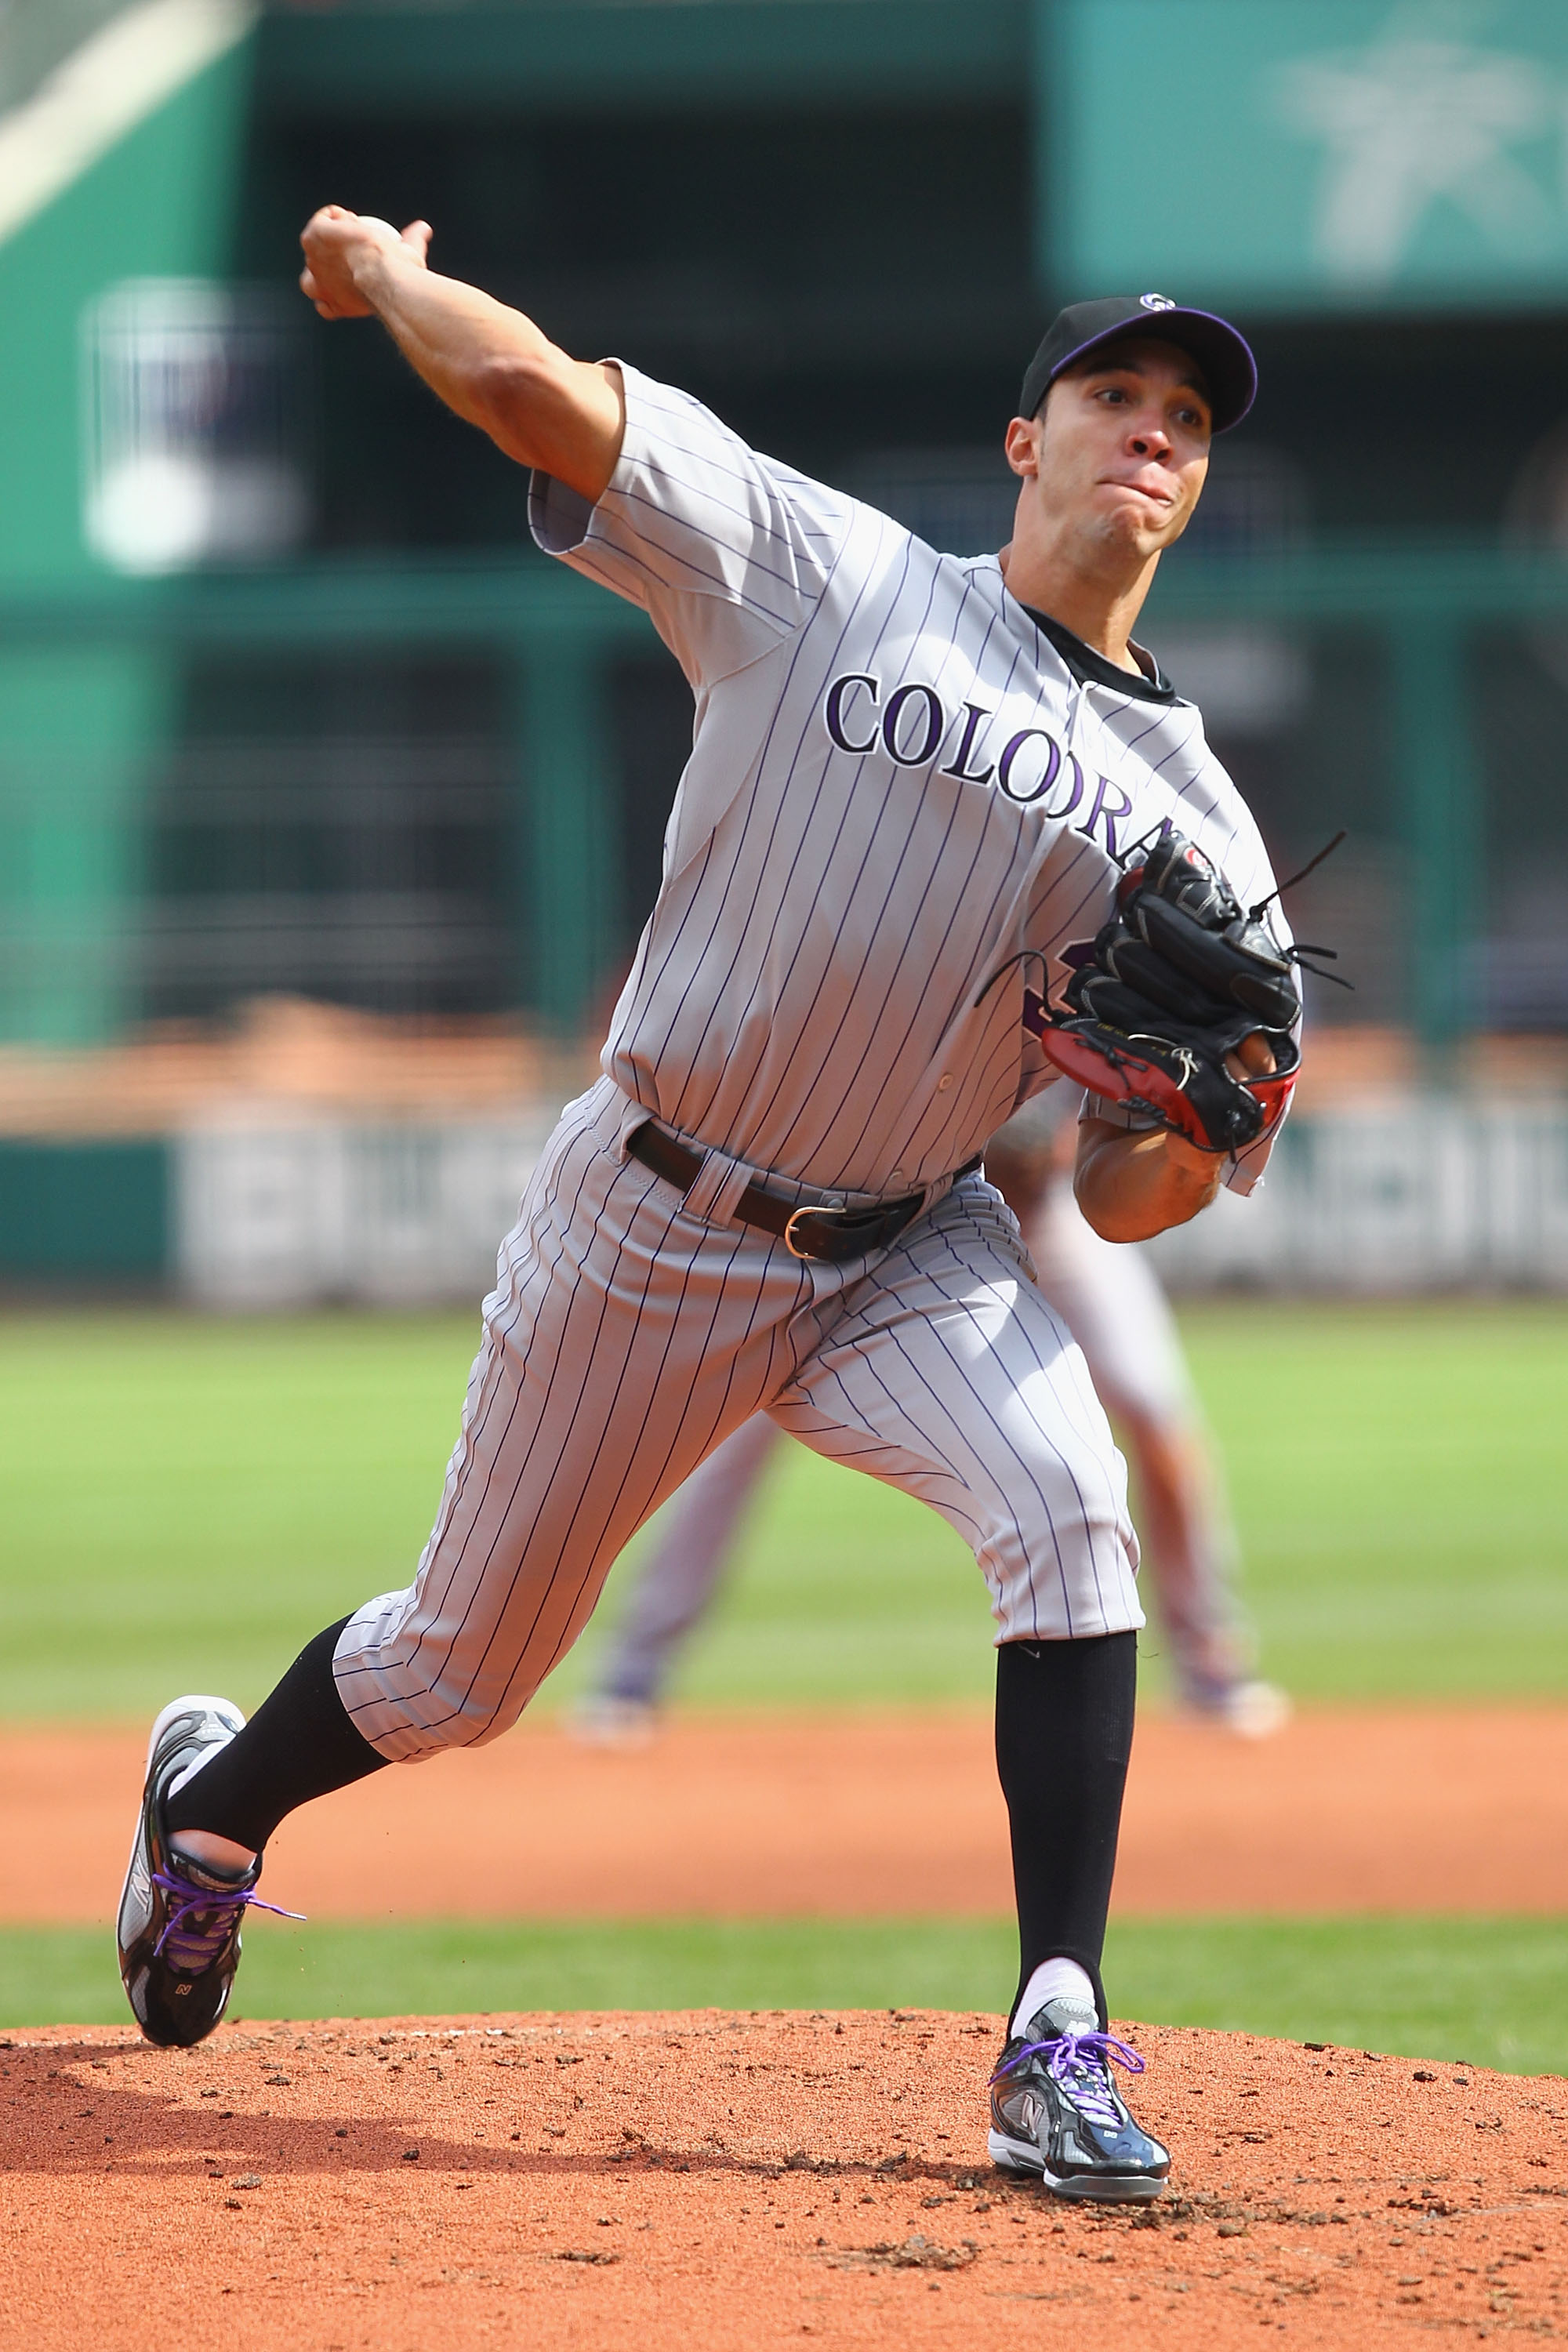 ST. LOUIS - OCTOBER 2: Starter Ubaldo Jimenez #38 of the Colorado Rockies pitches against the St. Louis Cardinals at Busch Stadium on October 2, 2010 in St. Louis, Missouri.  The Cardinals beat the Rockies 1-0 in 11 innings.  (Photo by Dilip Vishwanat/Get